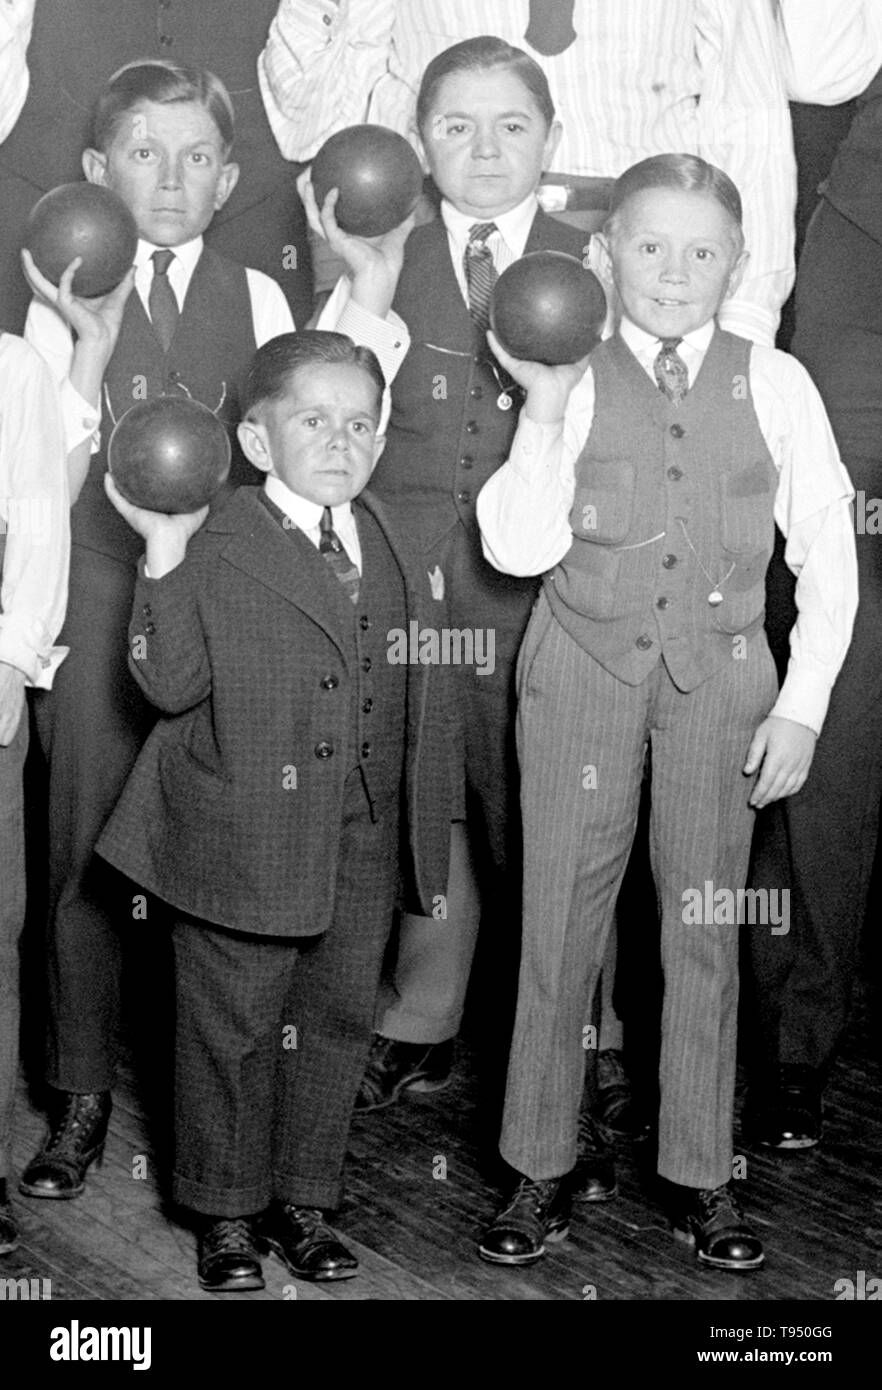 Entitled: 'Singer's Midgets Bowling at YMCA.' Singer's Midgets were a popular vaudeville group in the first half of the 20th century. Leopold von Singer (May 3, 1877 - March 5, 1951) formed Singer's Midgets in 1912-13, and built the Liliputstadt, a 'midget city' at the 'Venice in Vienna' amusement park, where they performed. The Liliputstadt was a major success, Singer began to tour with his performers throughout Europe and, in the process, recruited new members. Stock Photo